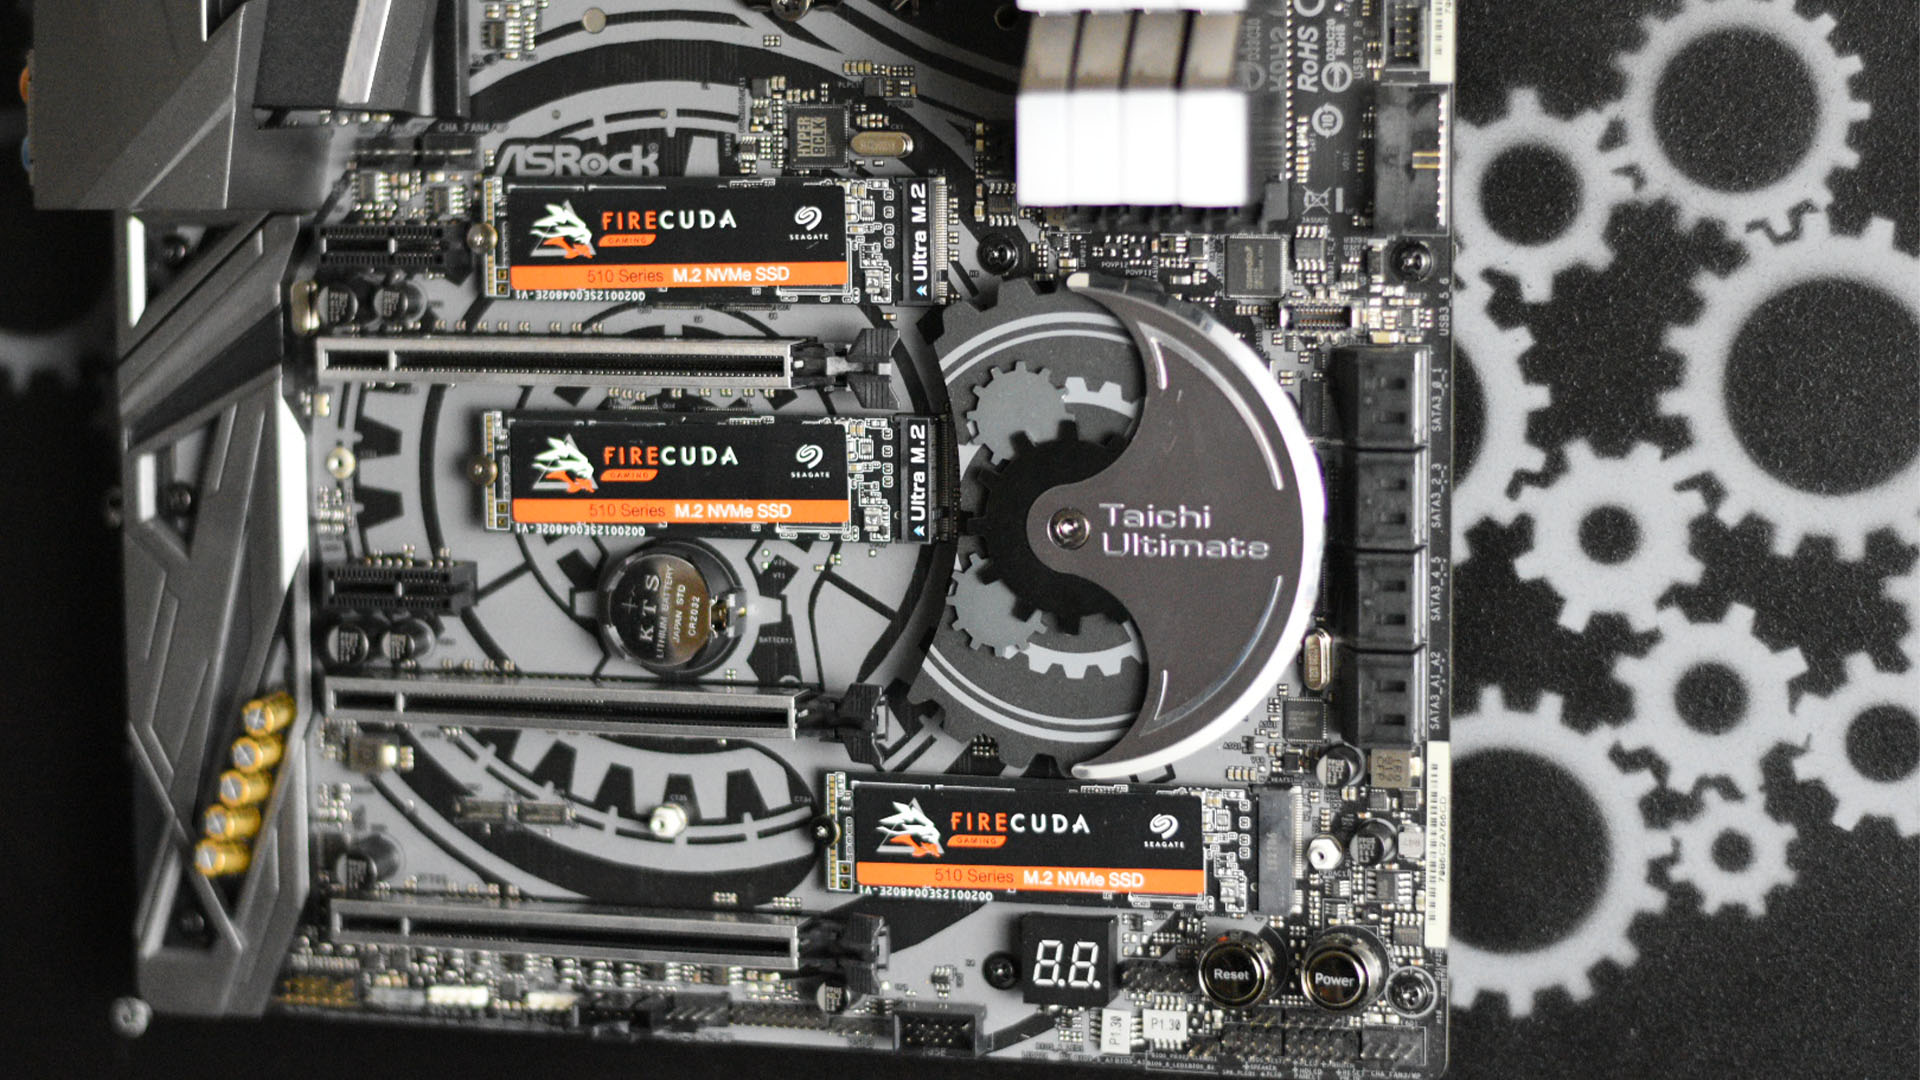 The cogs inside the Project Taichi gaming PC